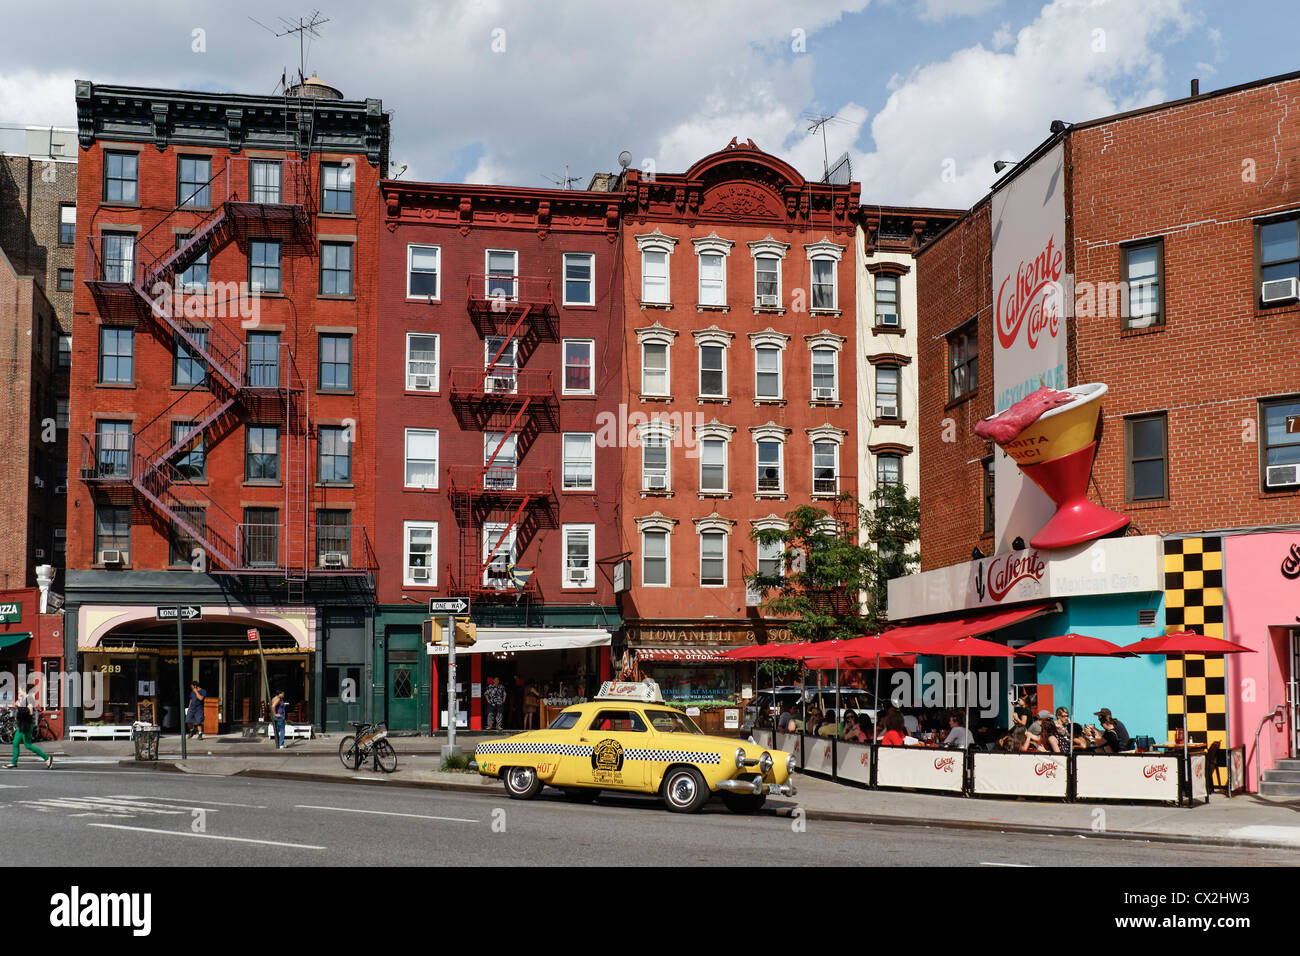 Caliente Cab, Mexican Restaurant, West Village, 7th Ave South, New York Stock Photo